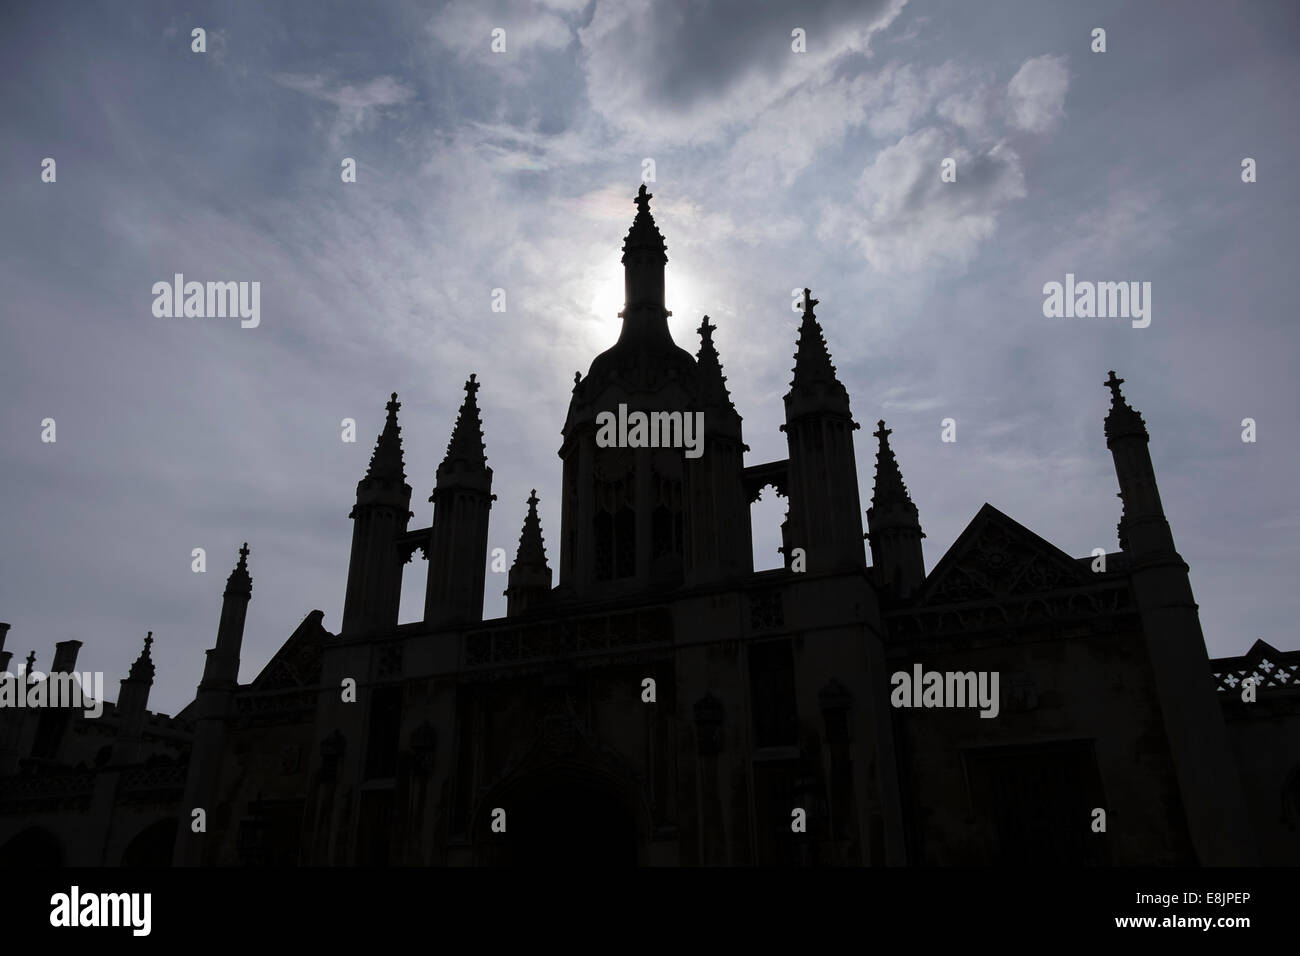 Silhouette_of_Kings_college_gate_spires_